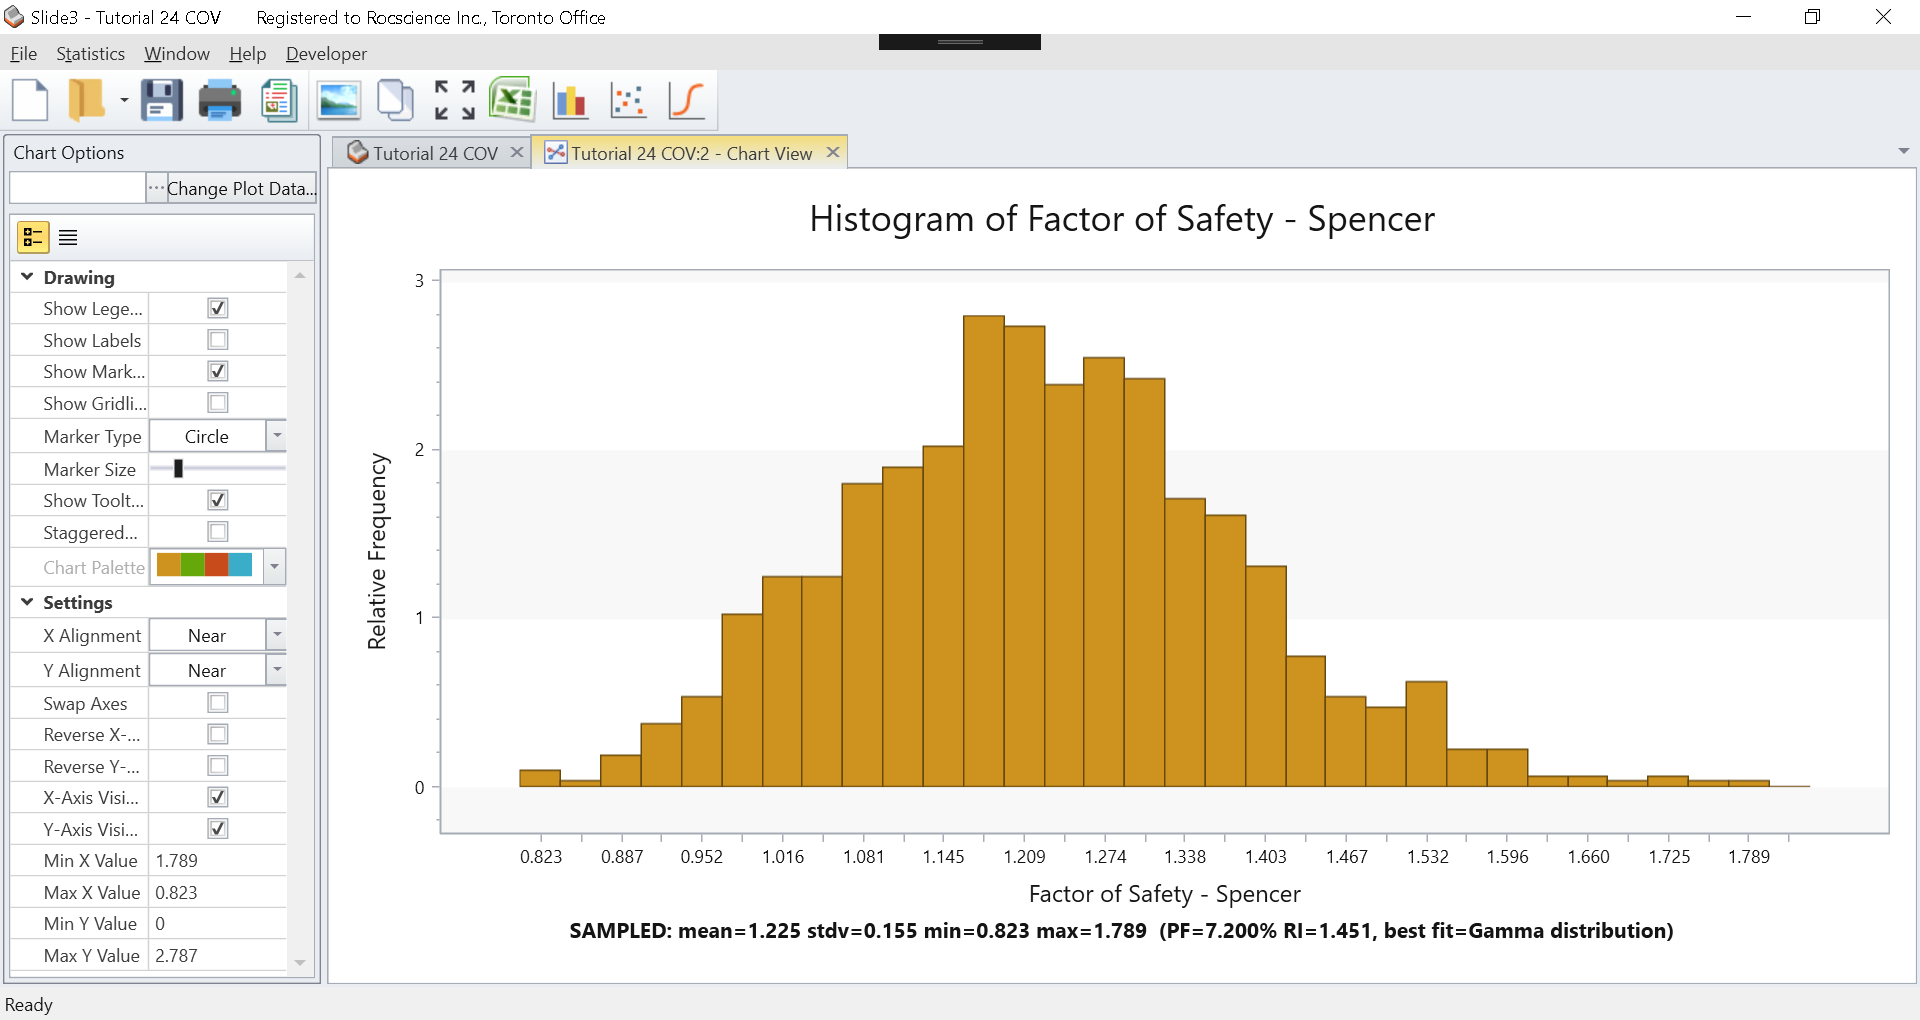 Histogram of Factor of Safety